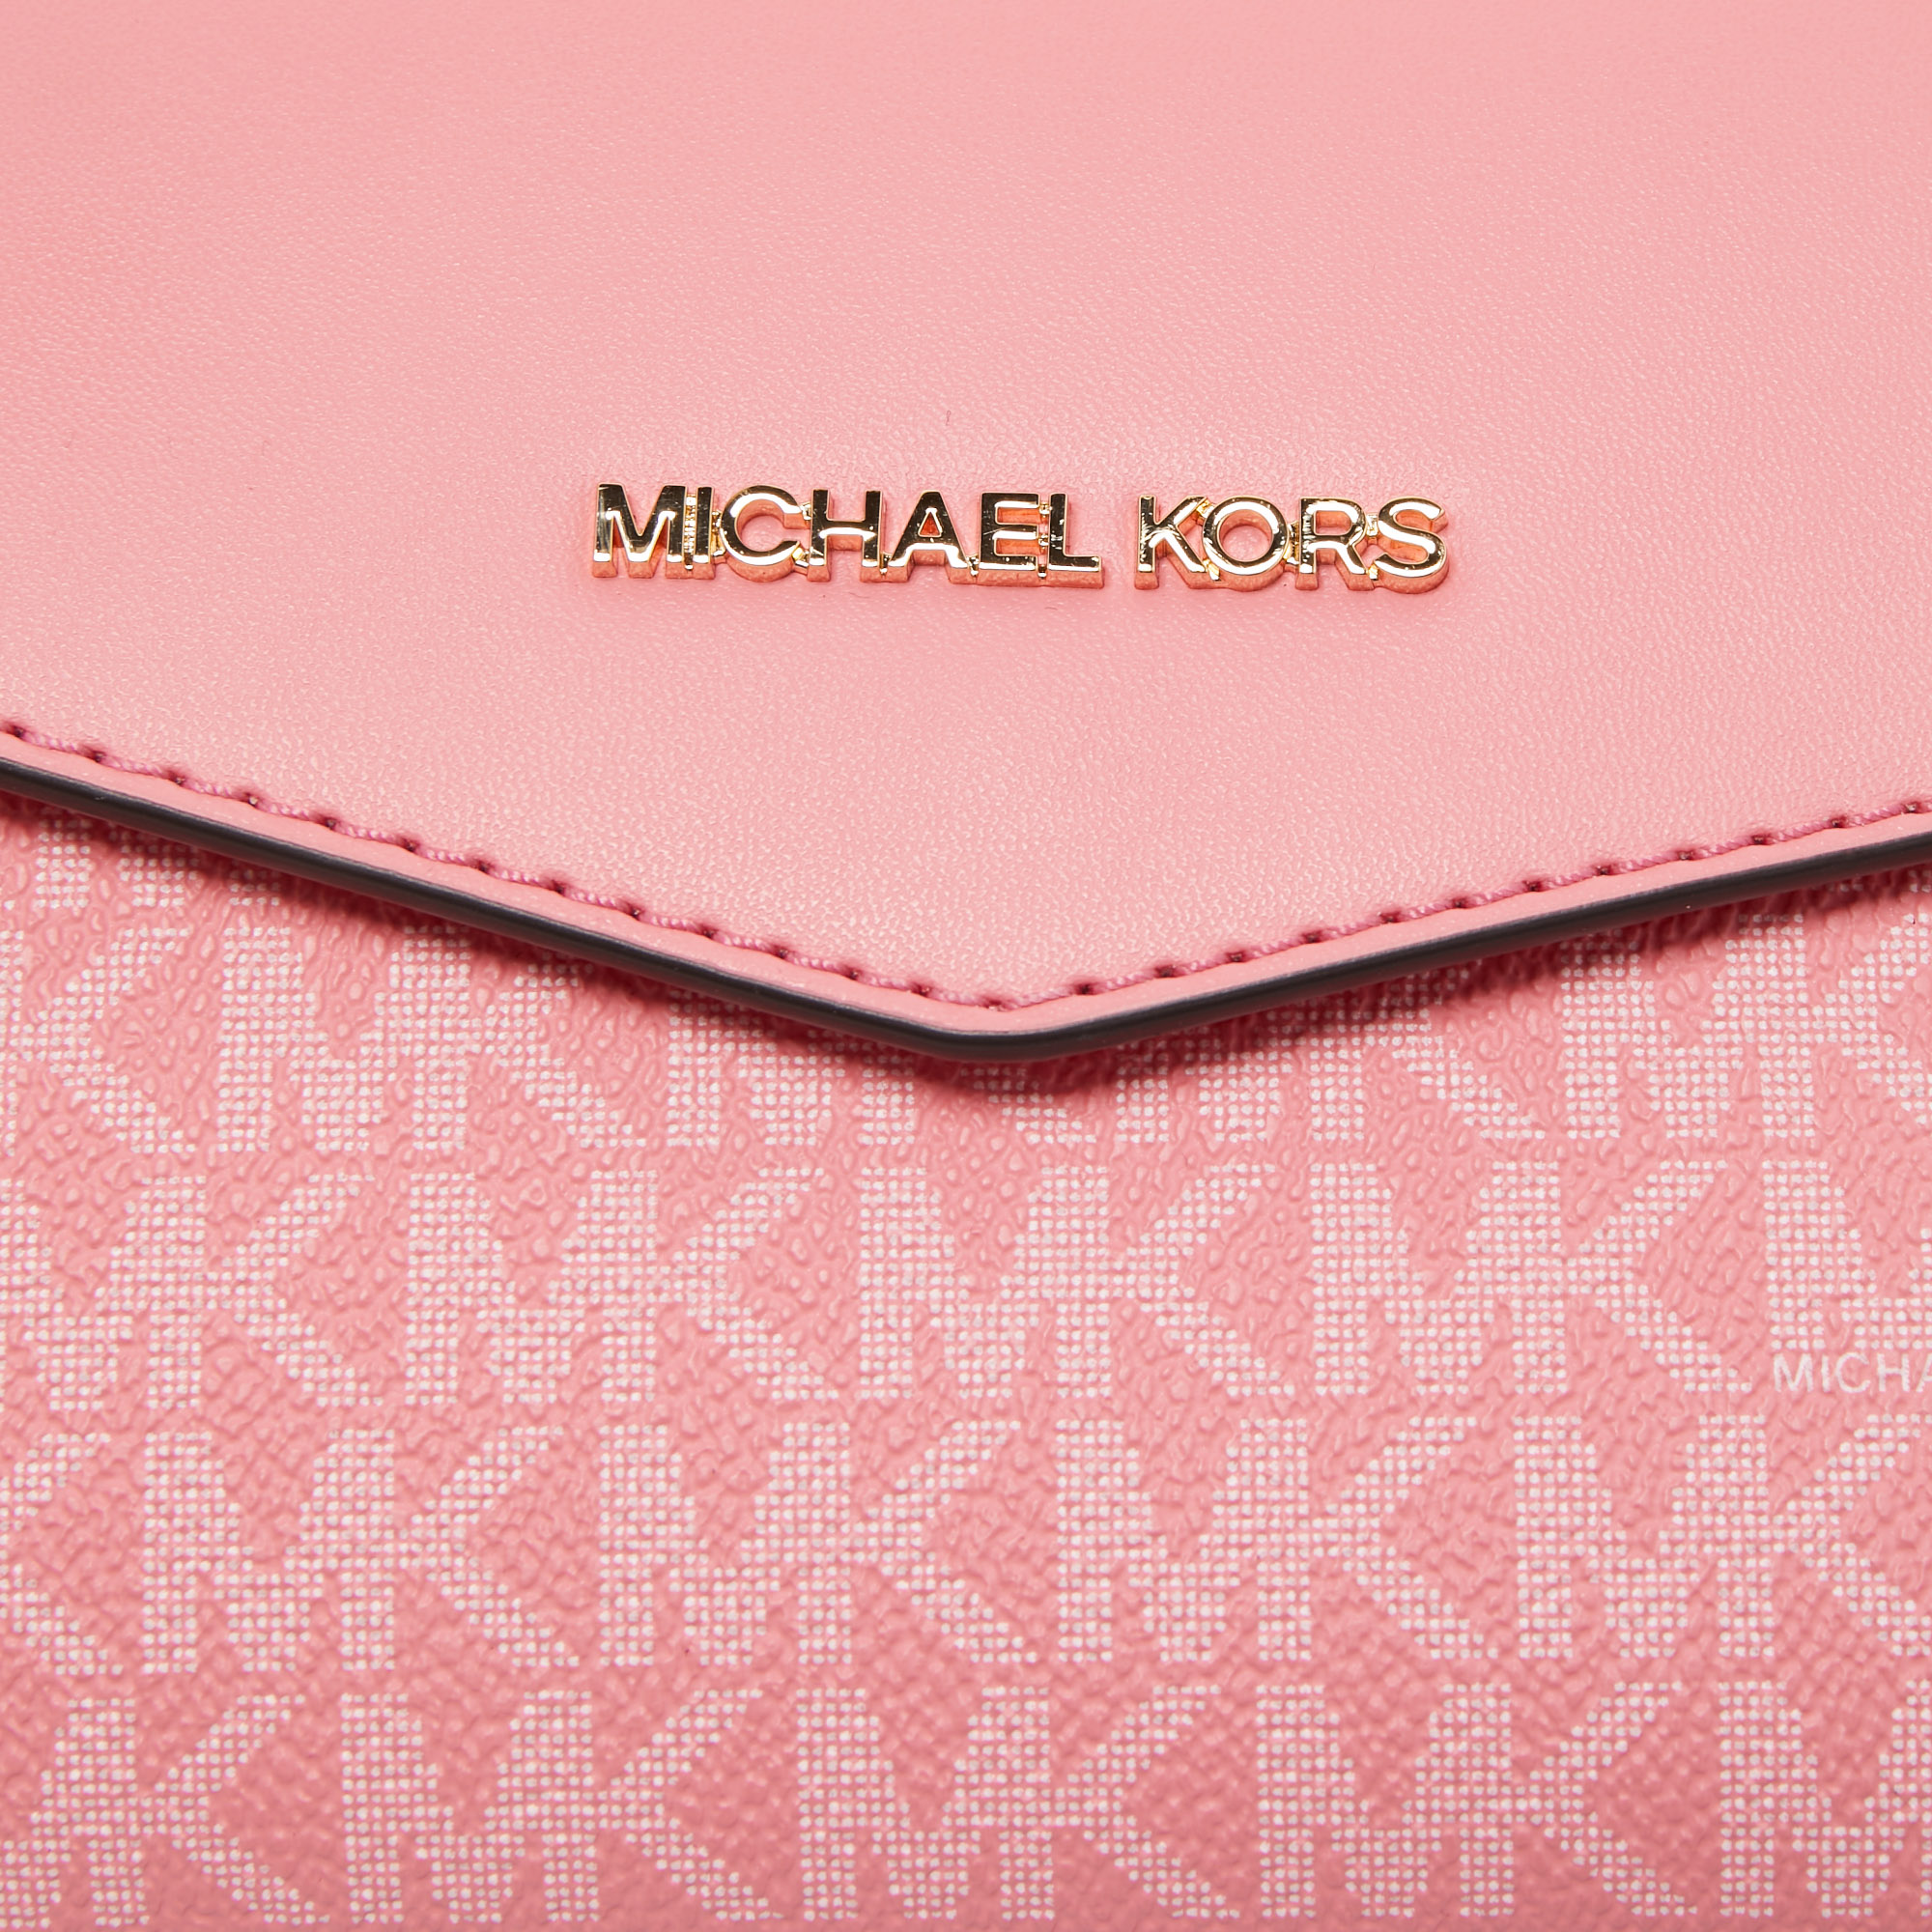 Michael Kors Pink Signature Coated Canvas And Leather Envelope Flap Clutch Bag